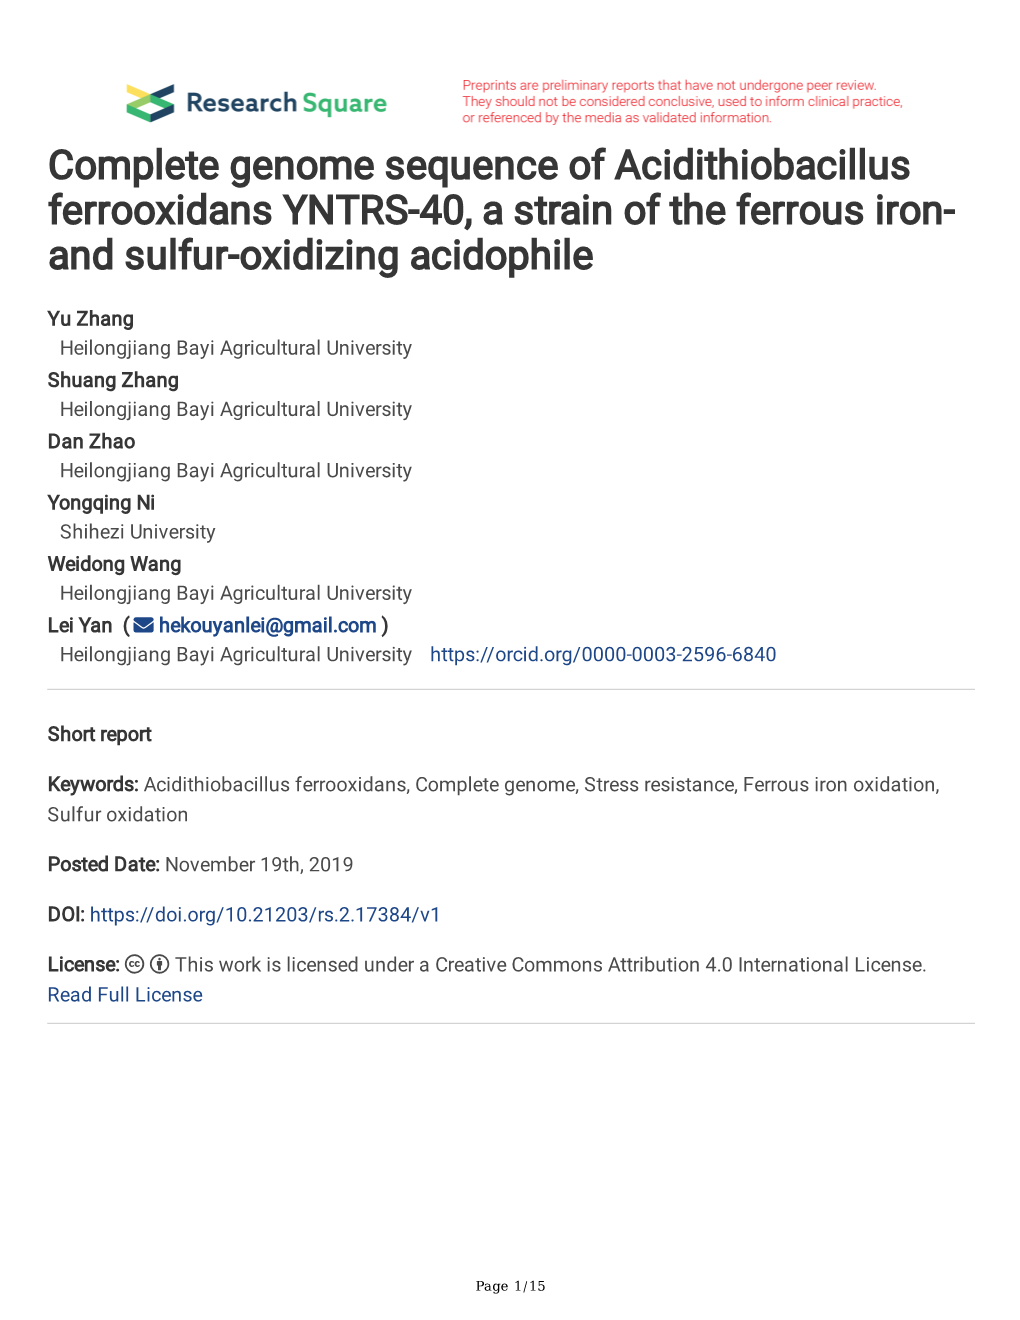 Complete Genome Sequence of Acidithiobacillus Ferrooxidans YNTRS-40, a Strain of the Ferrous Iron- and Sulfur-Oxidizing Acidophile